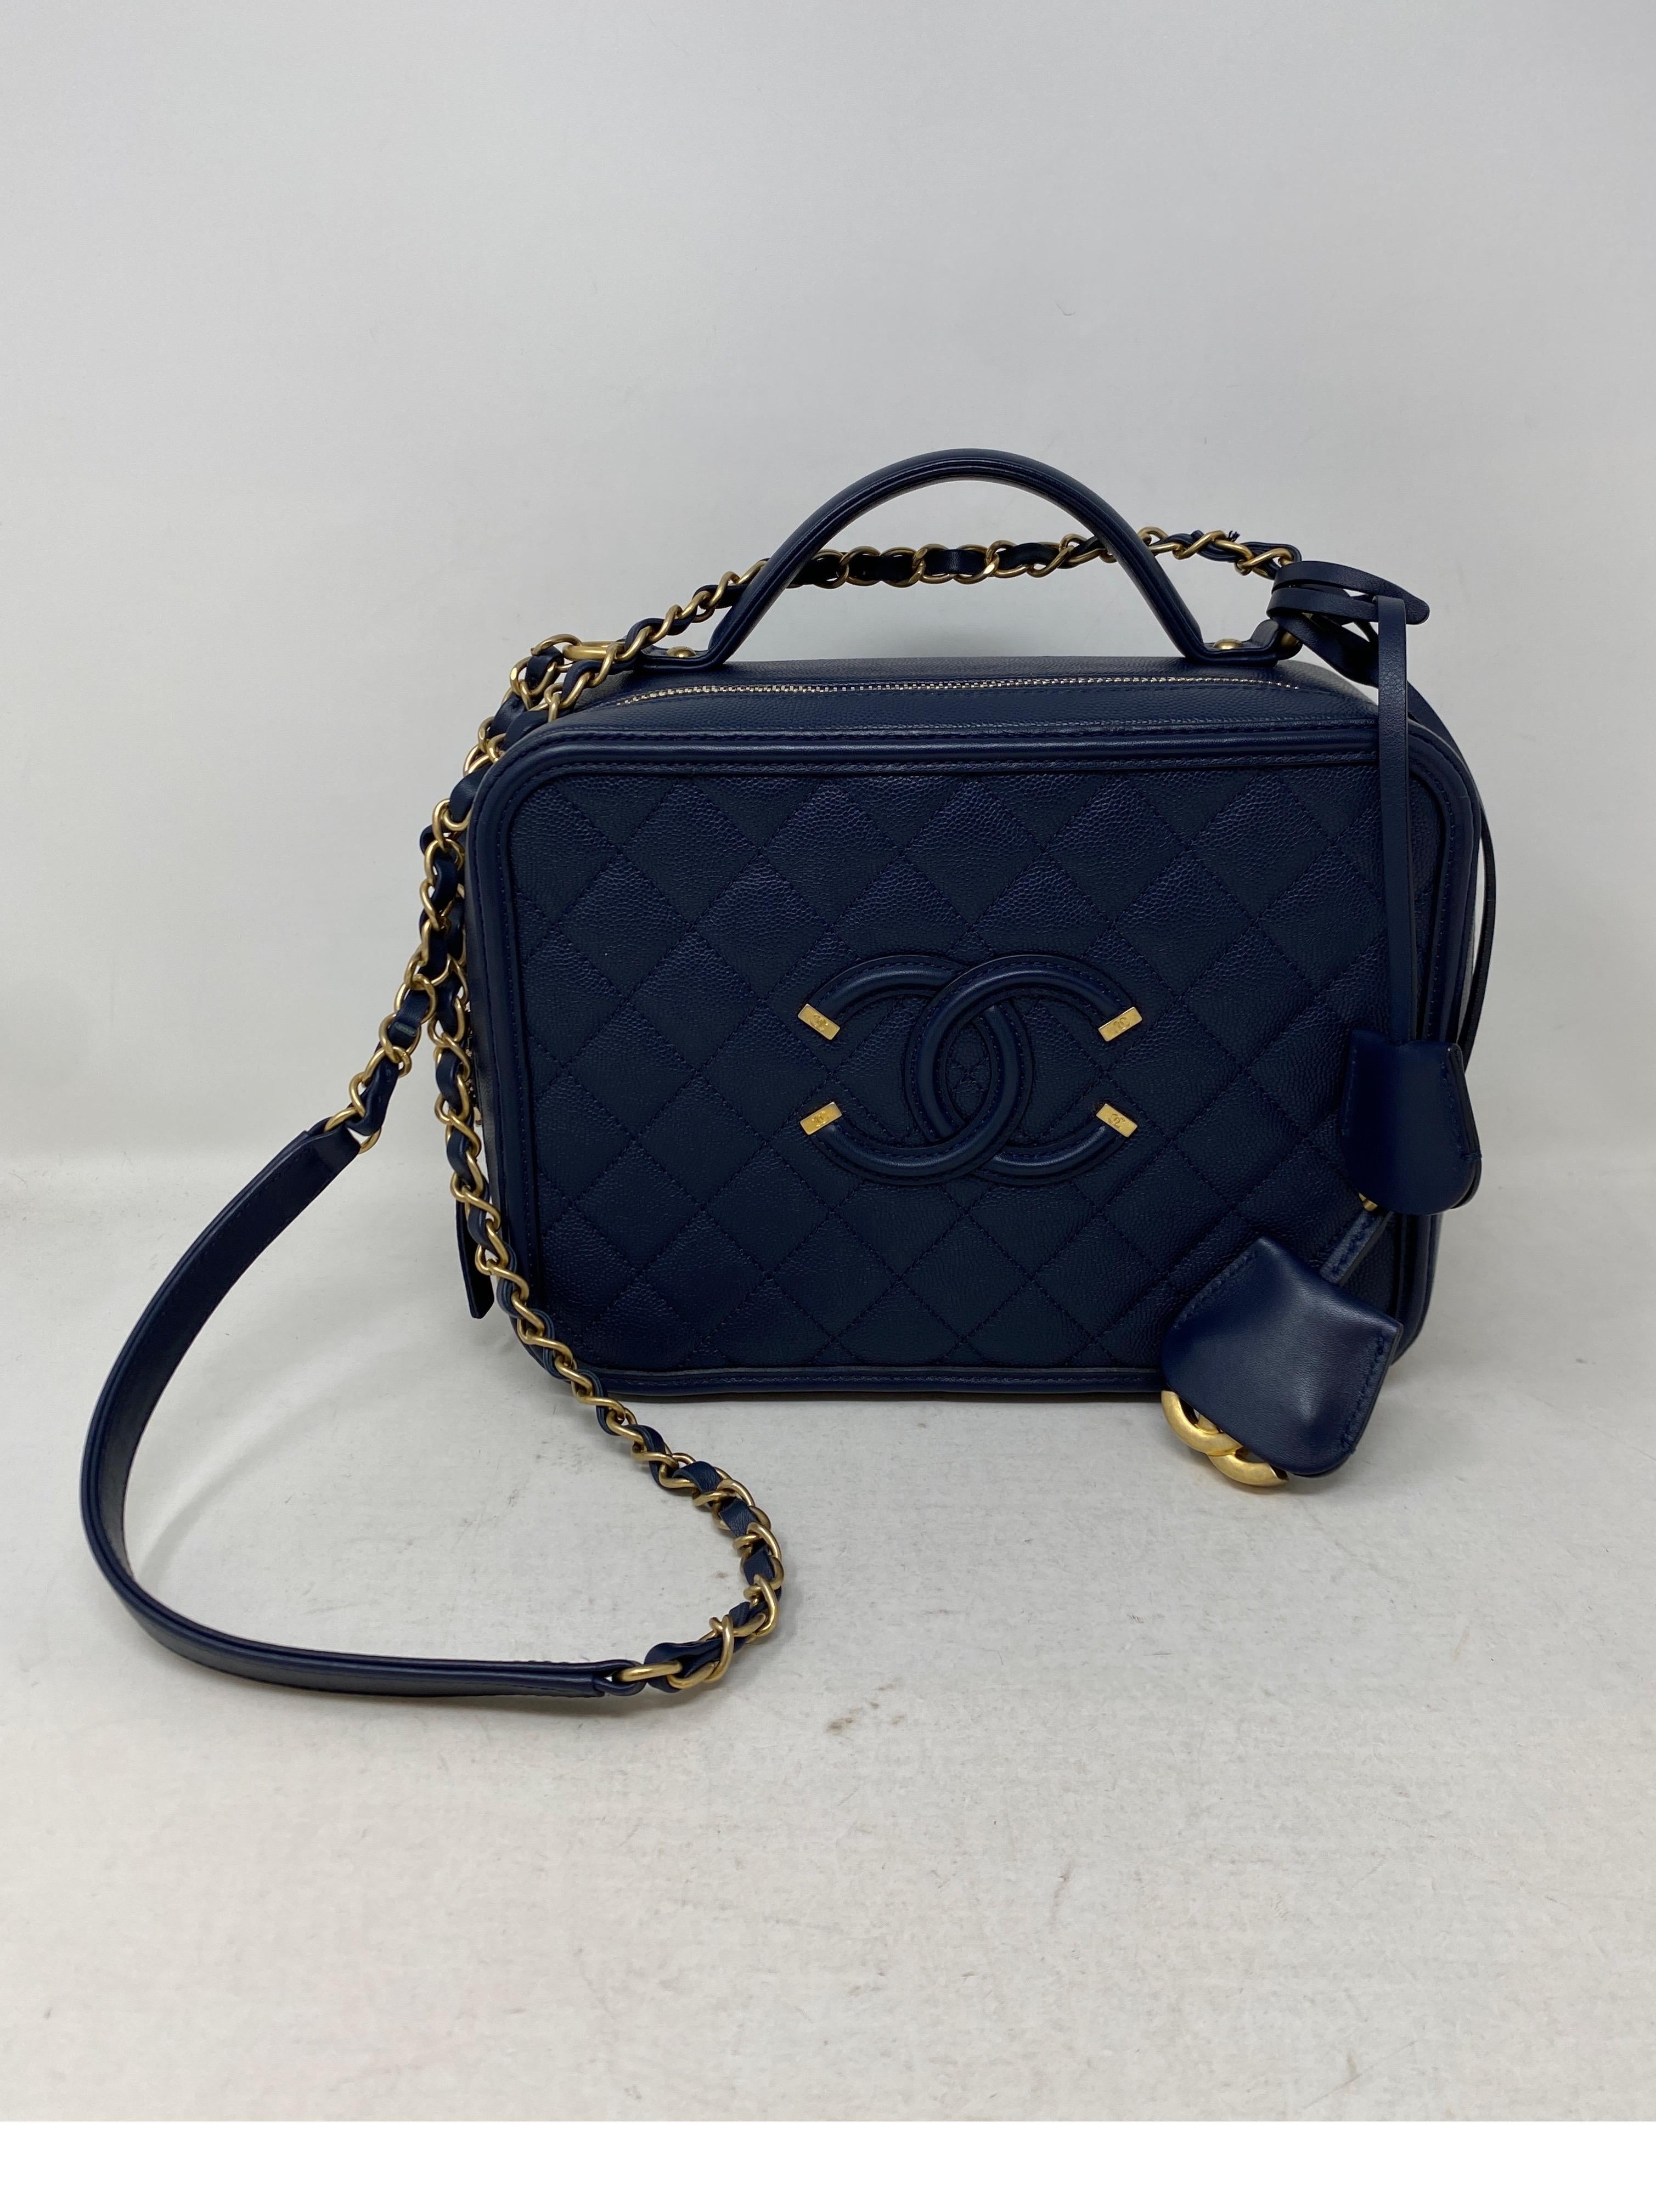 Chanel Navy Blue Vanity Bag. Caviar leather. Excellent condition. Gold hardware. Hard to find vanity bag. Collector's piece. Includes authenticity card and dust bag. Guaranteed authentic. 